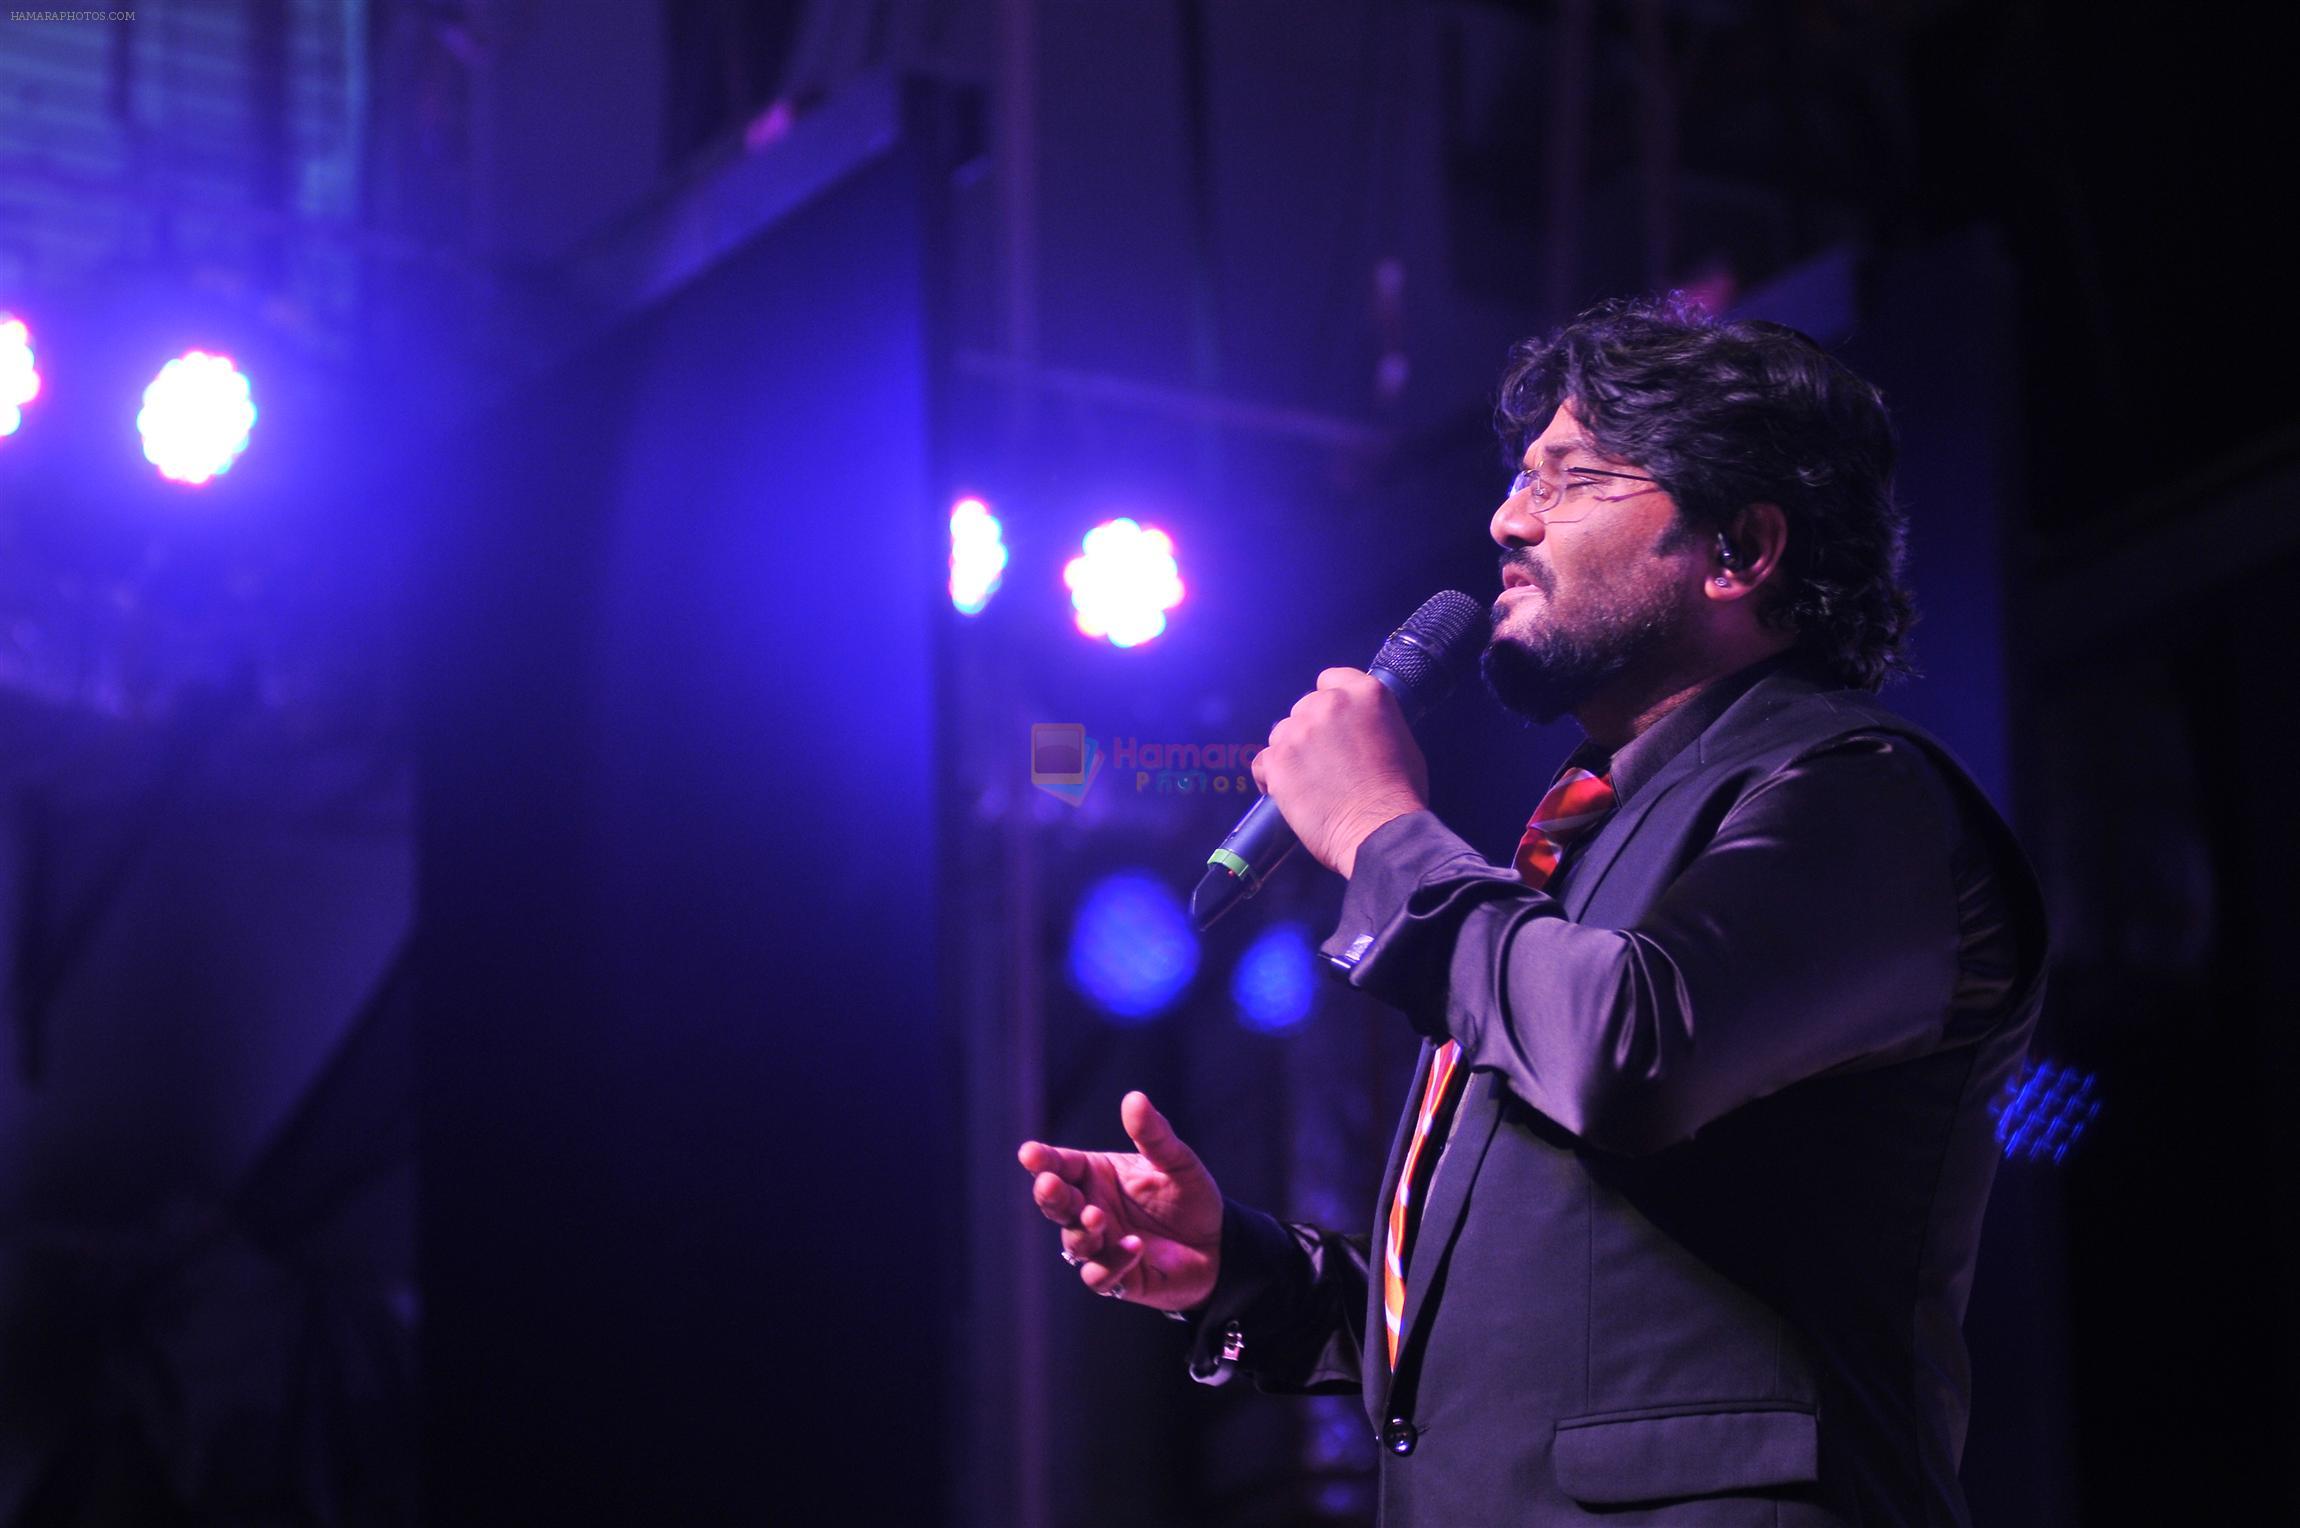 babul Supriyo at the Tribute to Jagjit Singh with musical concert Rehmatein in Mumbai on 18th July 2015